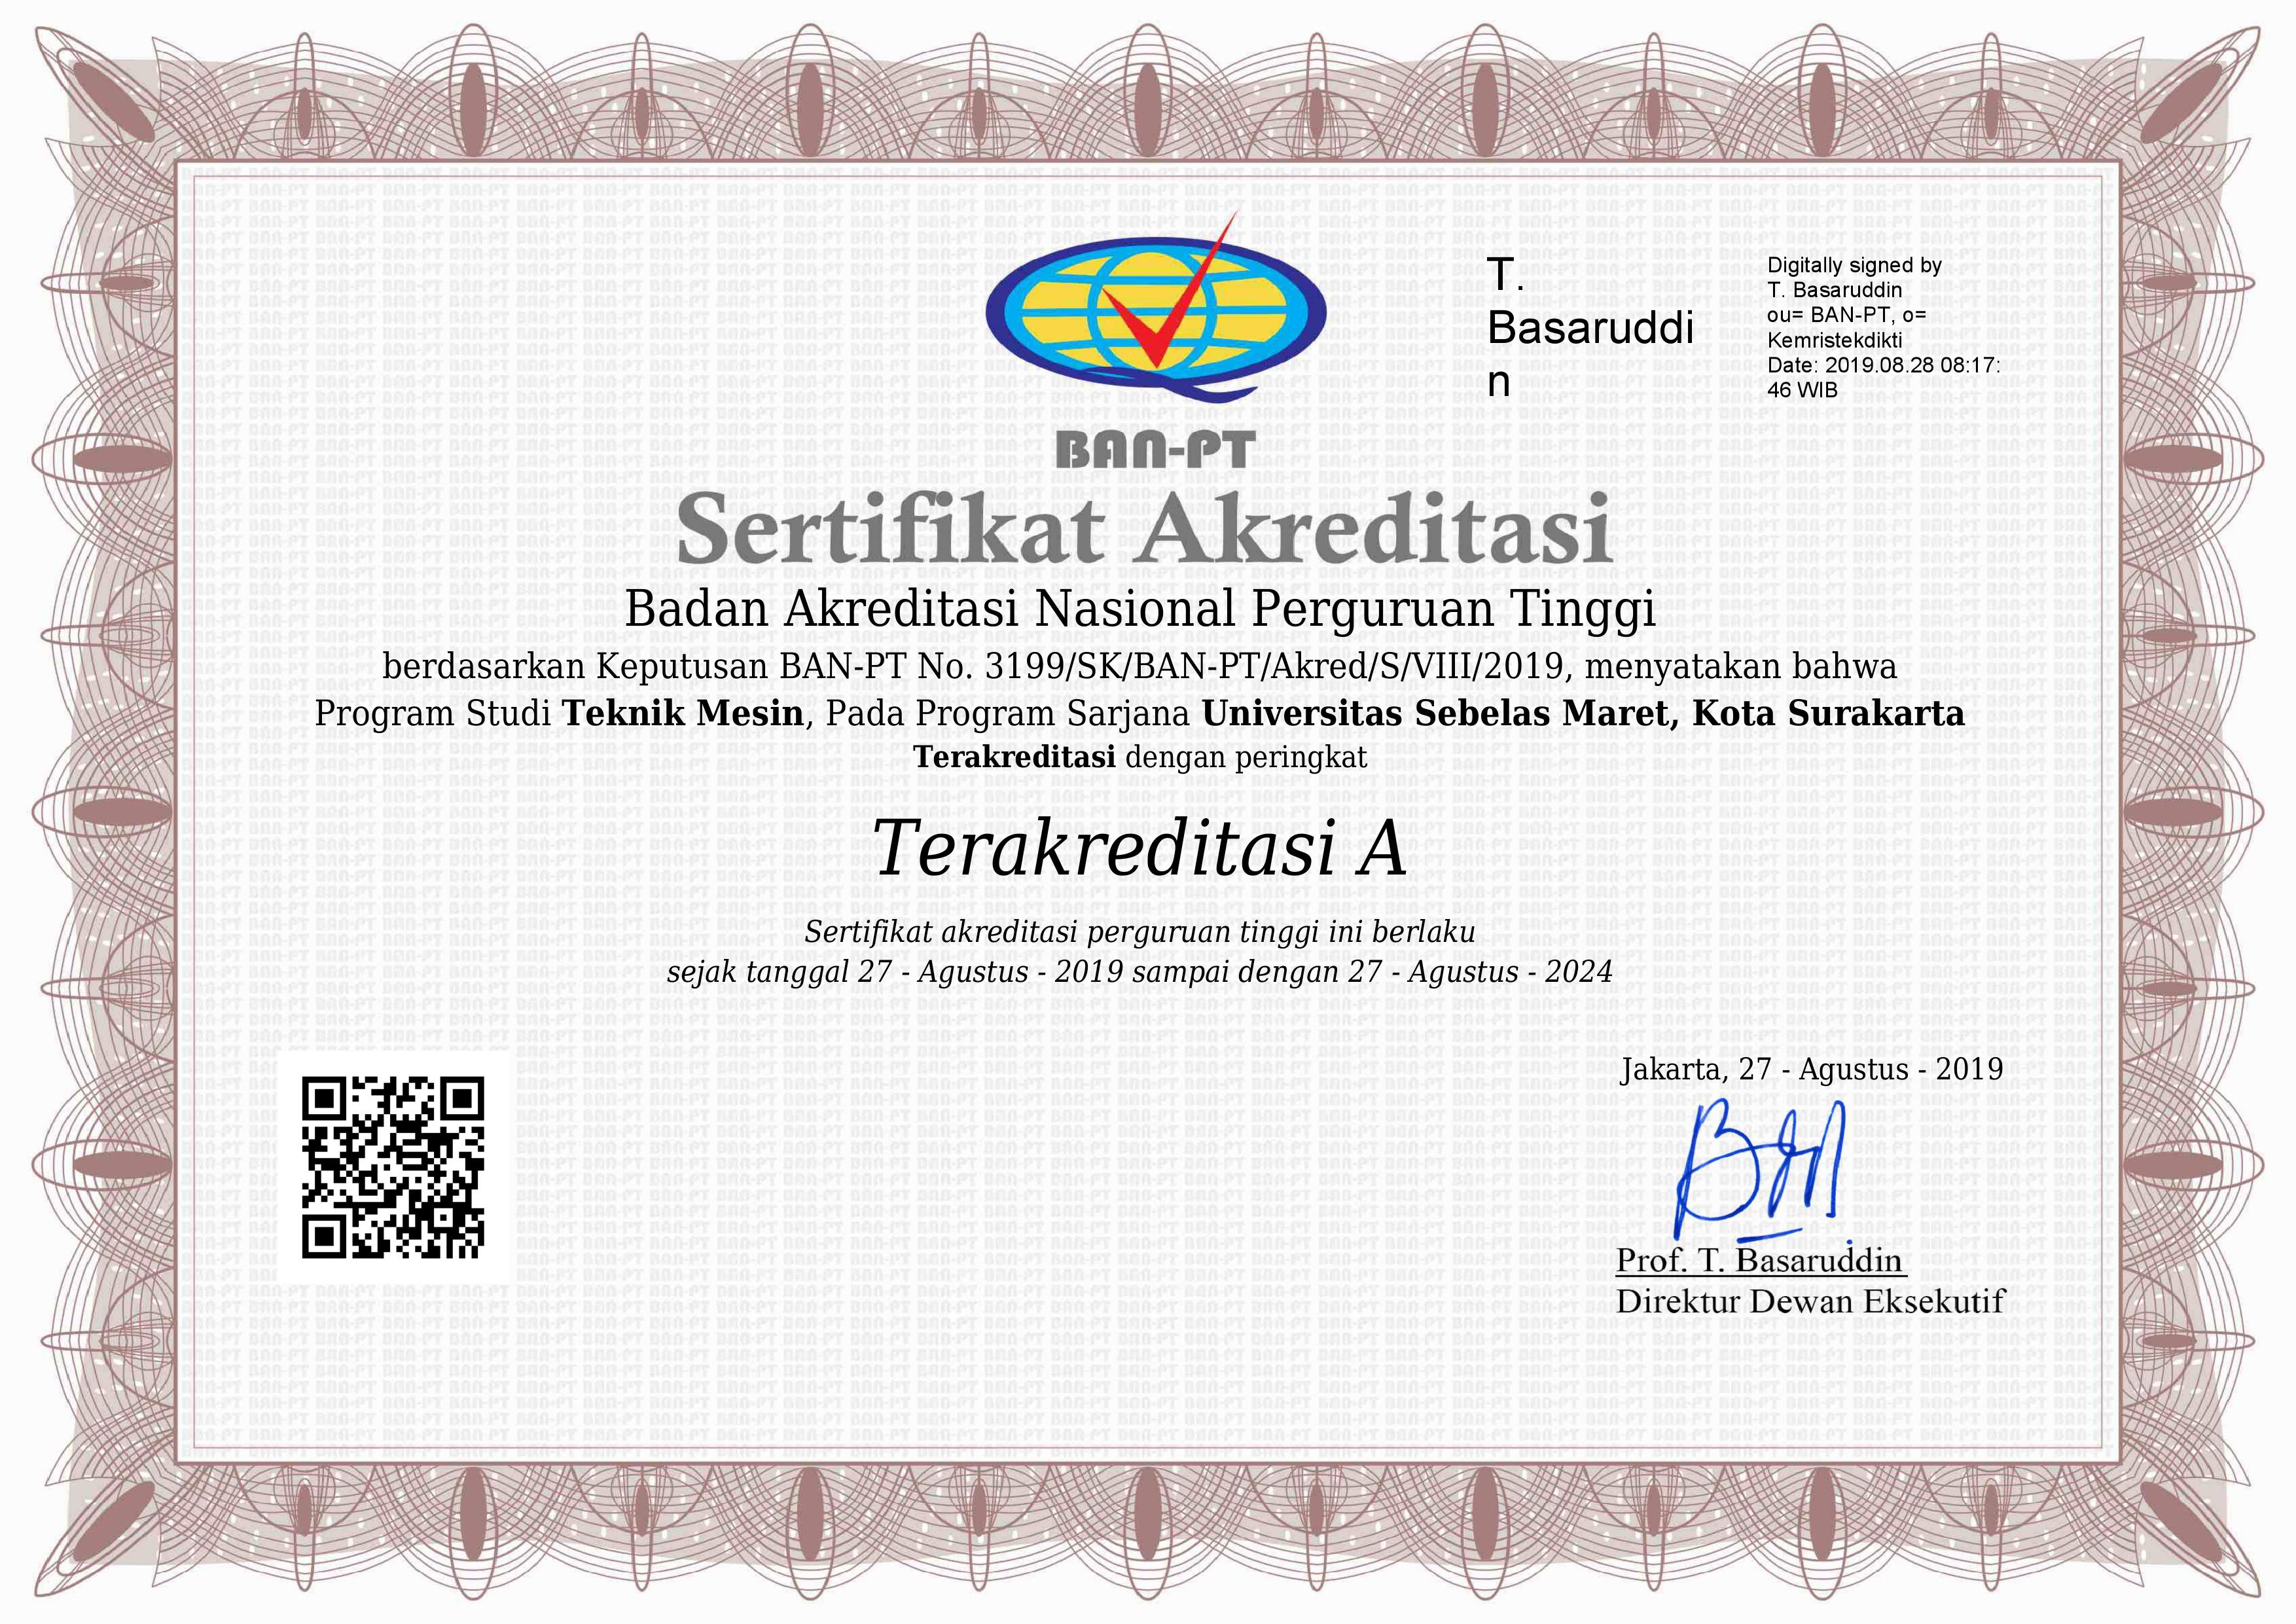 Mechanical Engineering Sebelas Maret University (UNS) received an A accreditation